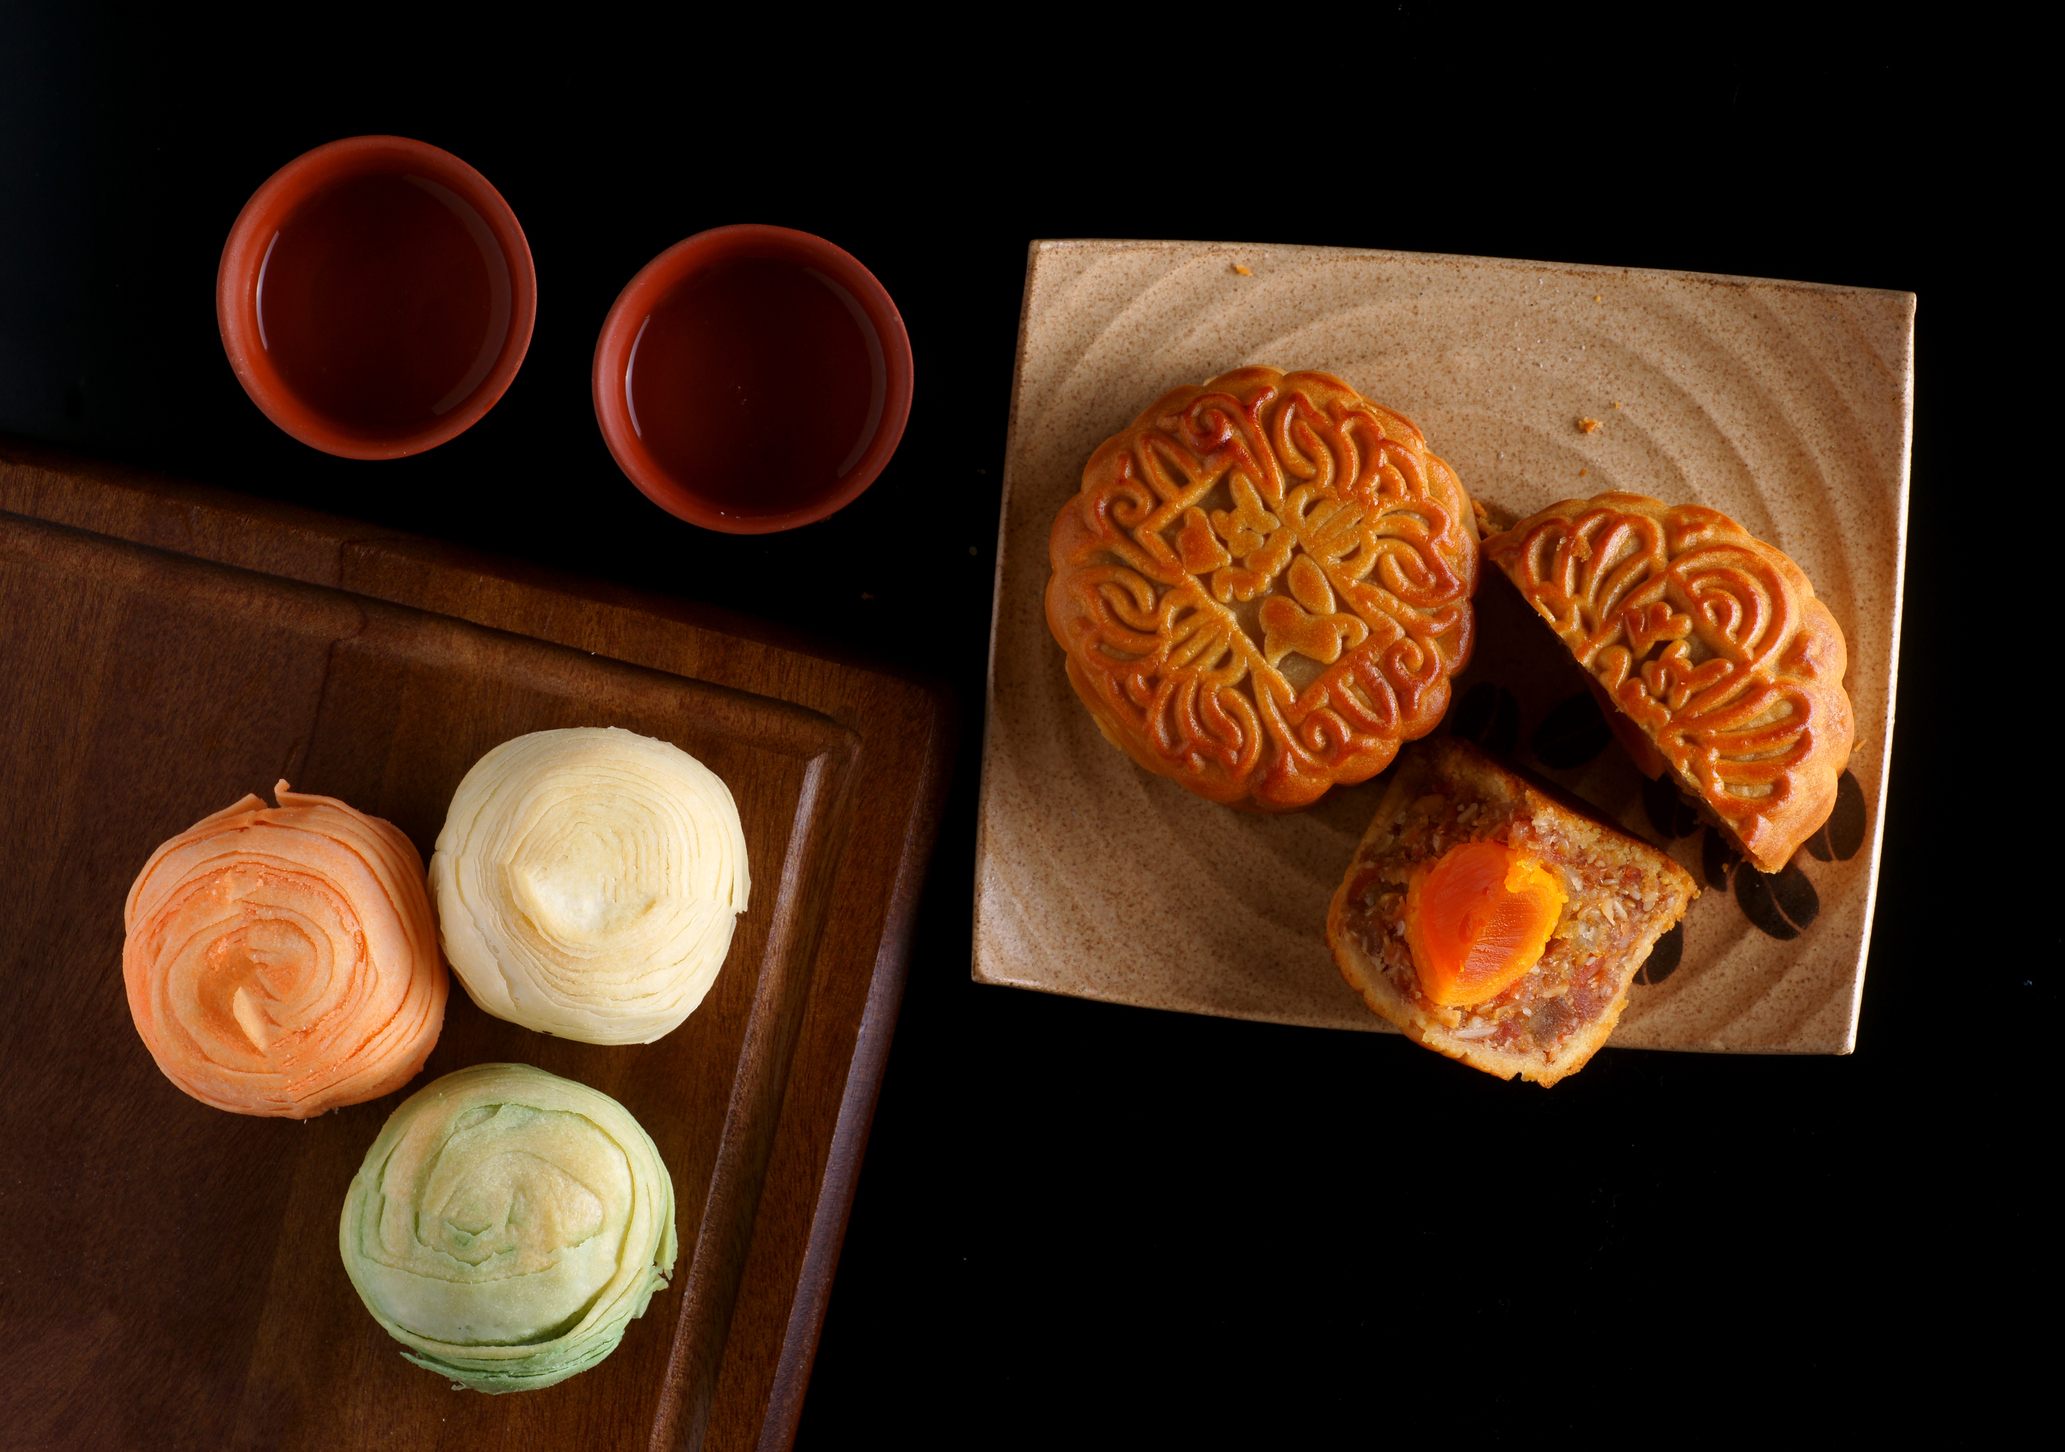 How are mooncakes so rich in calories? - Quora